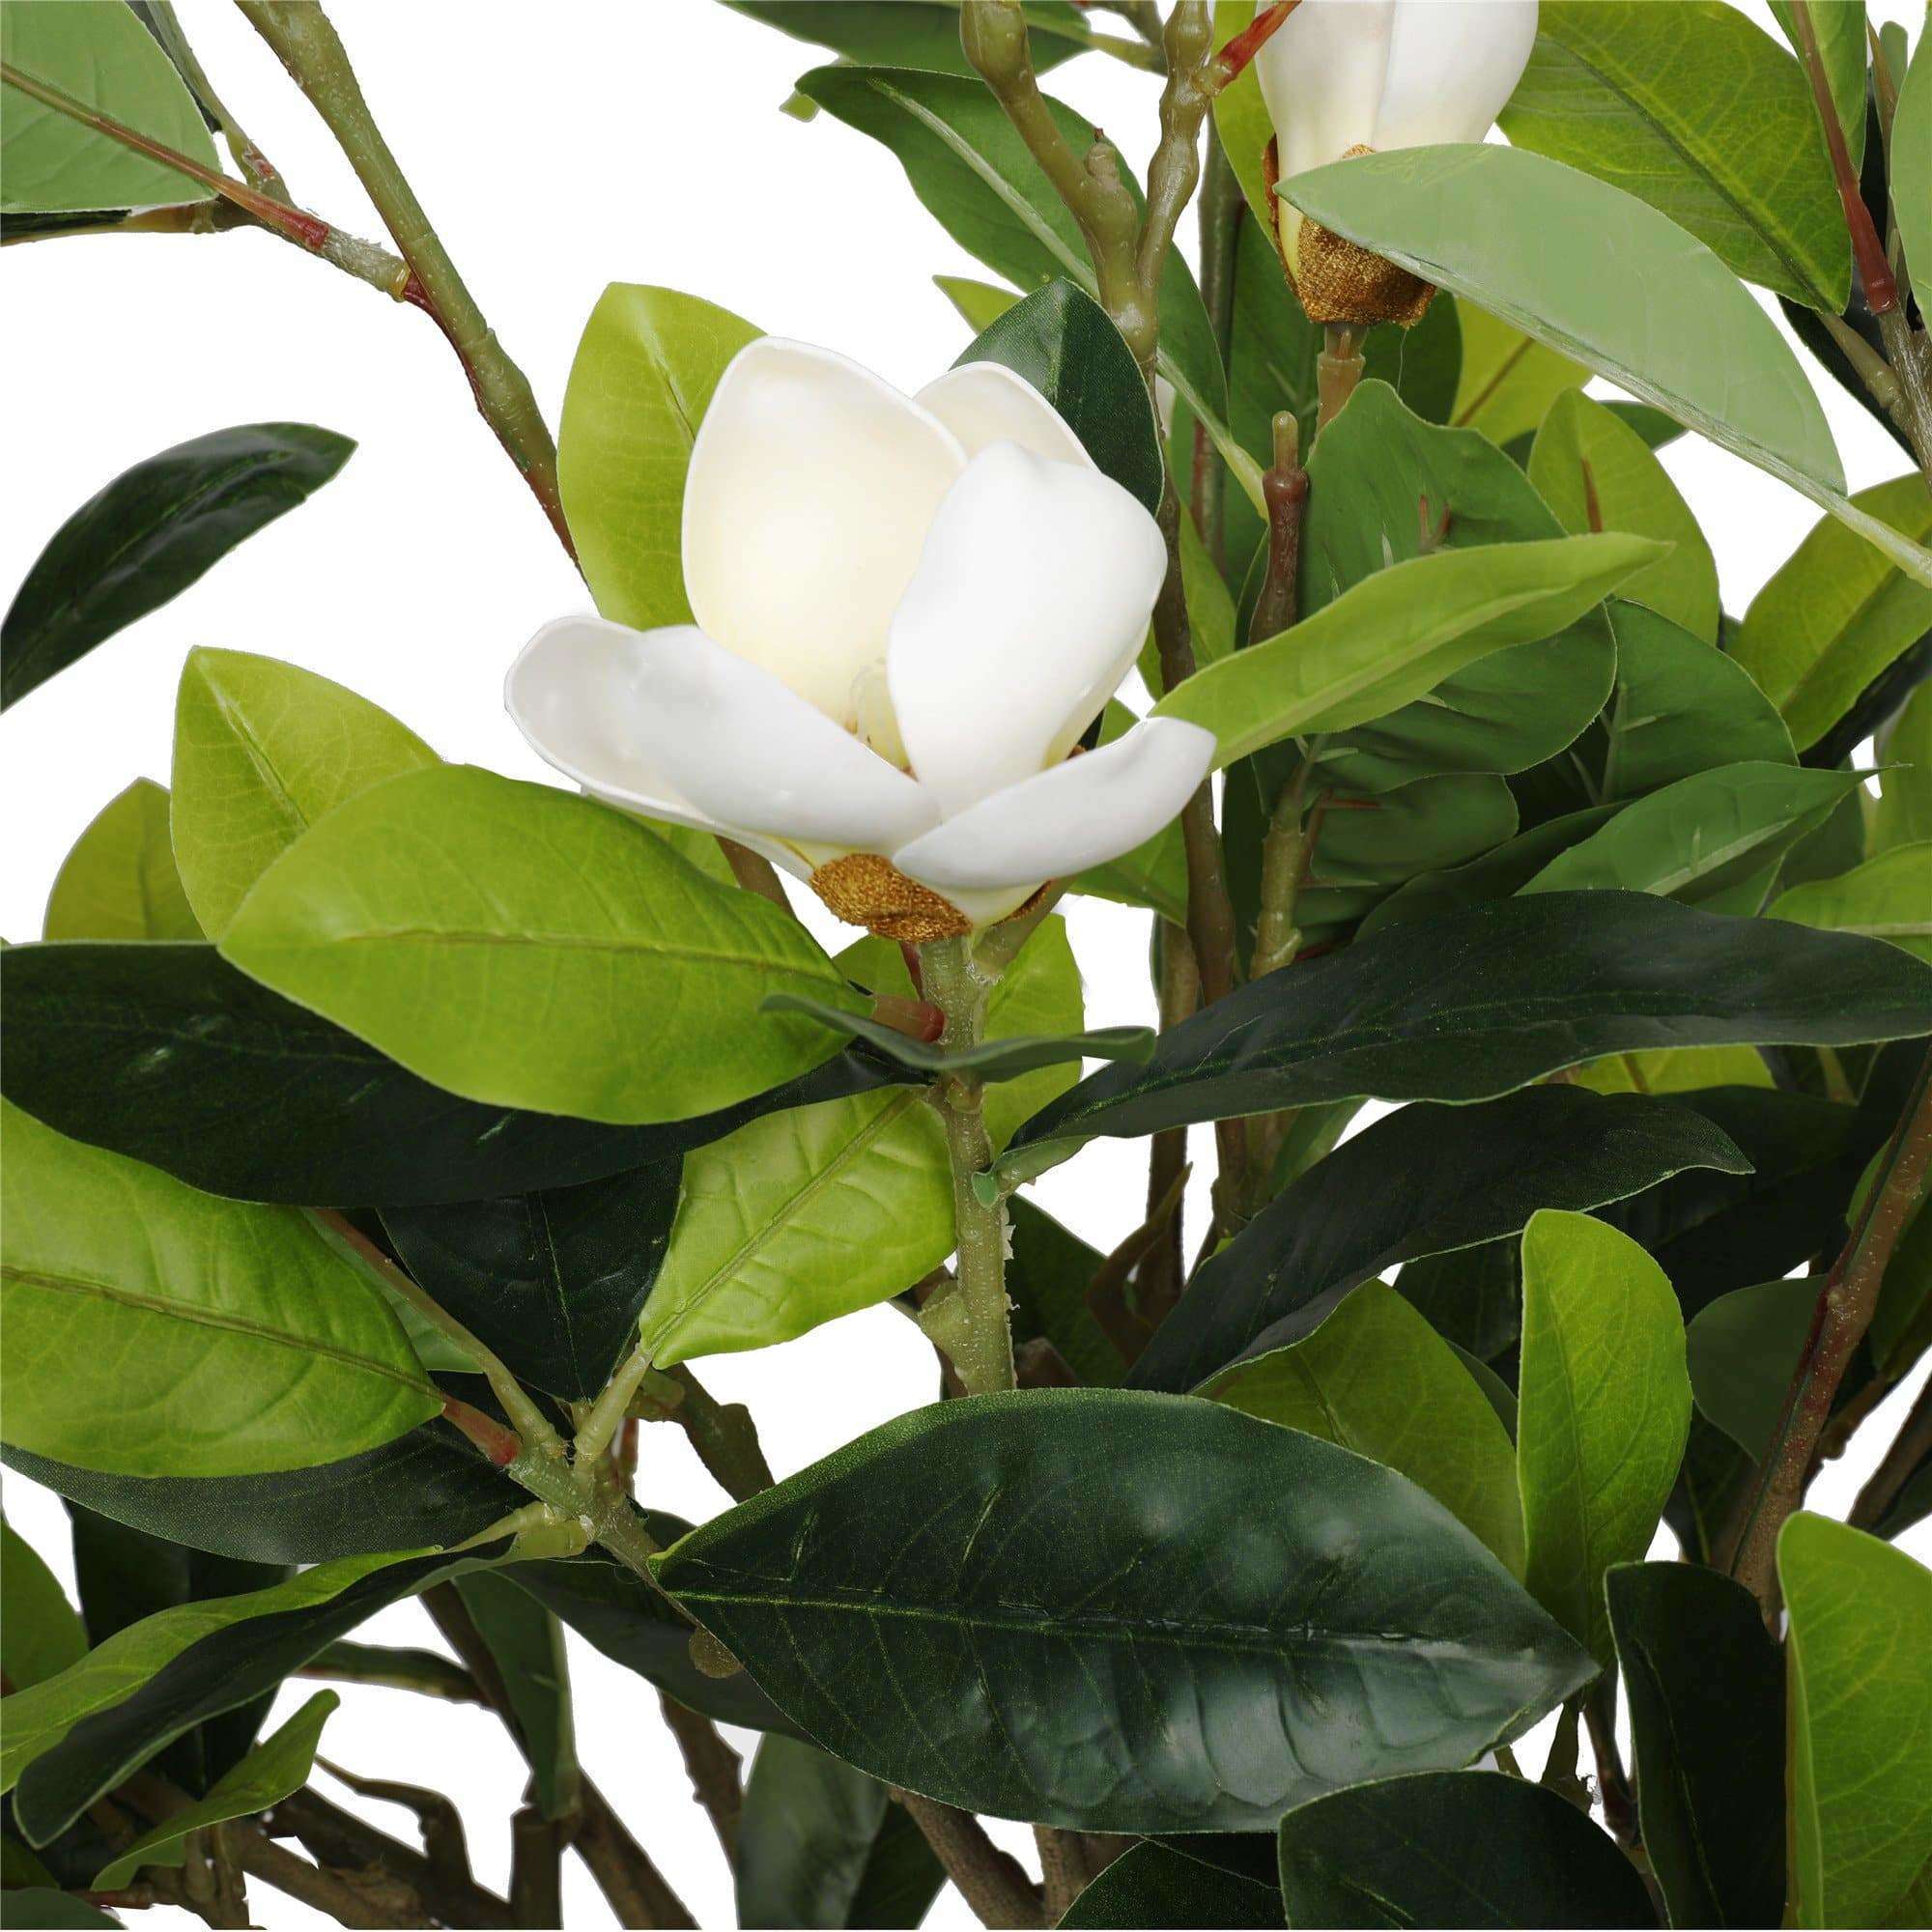 Faux Potted Magnolia Tree with Stunning White Flowers 130cm - Designer Vertical Gardens artificial vertical garden plants flowering